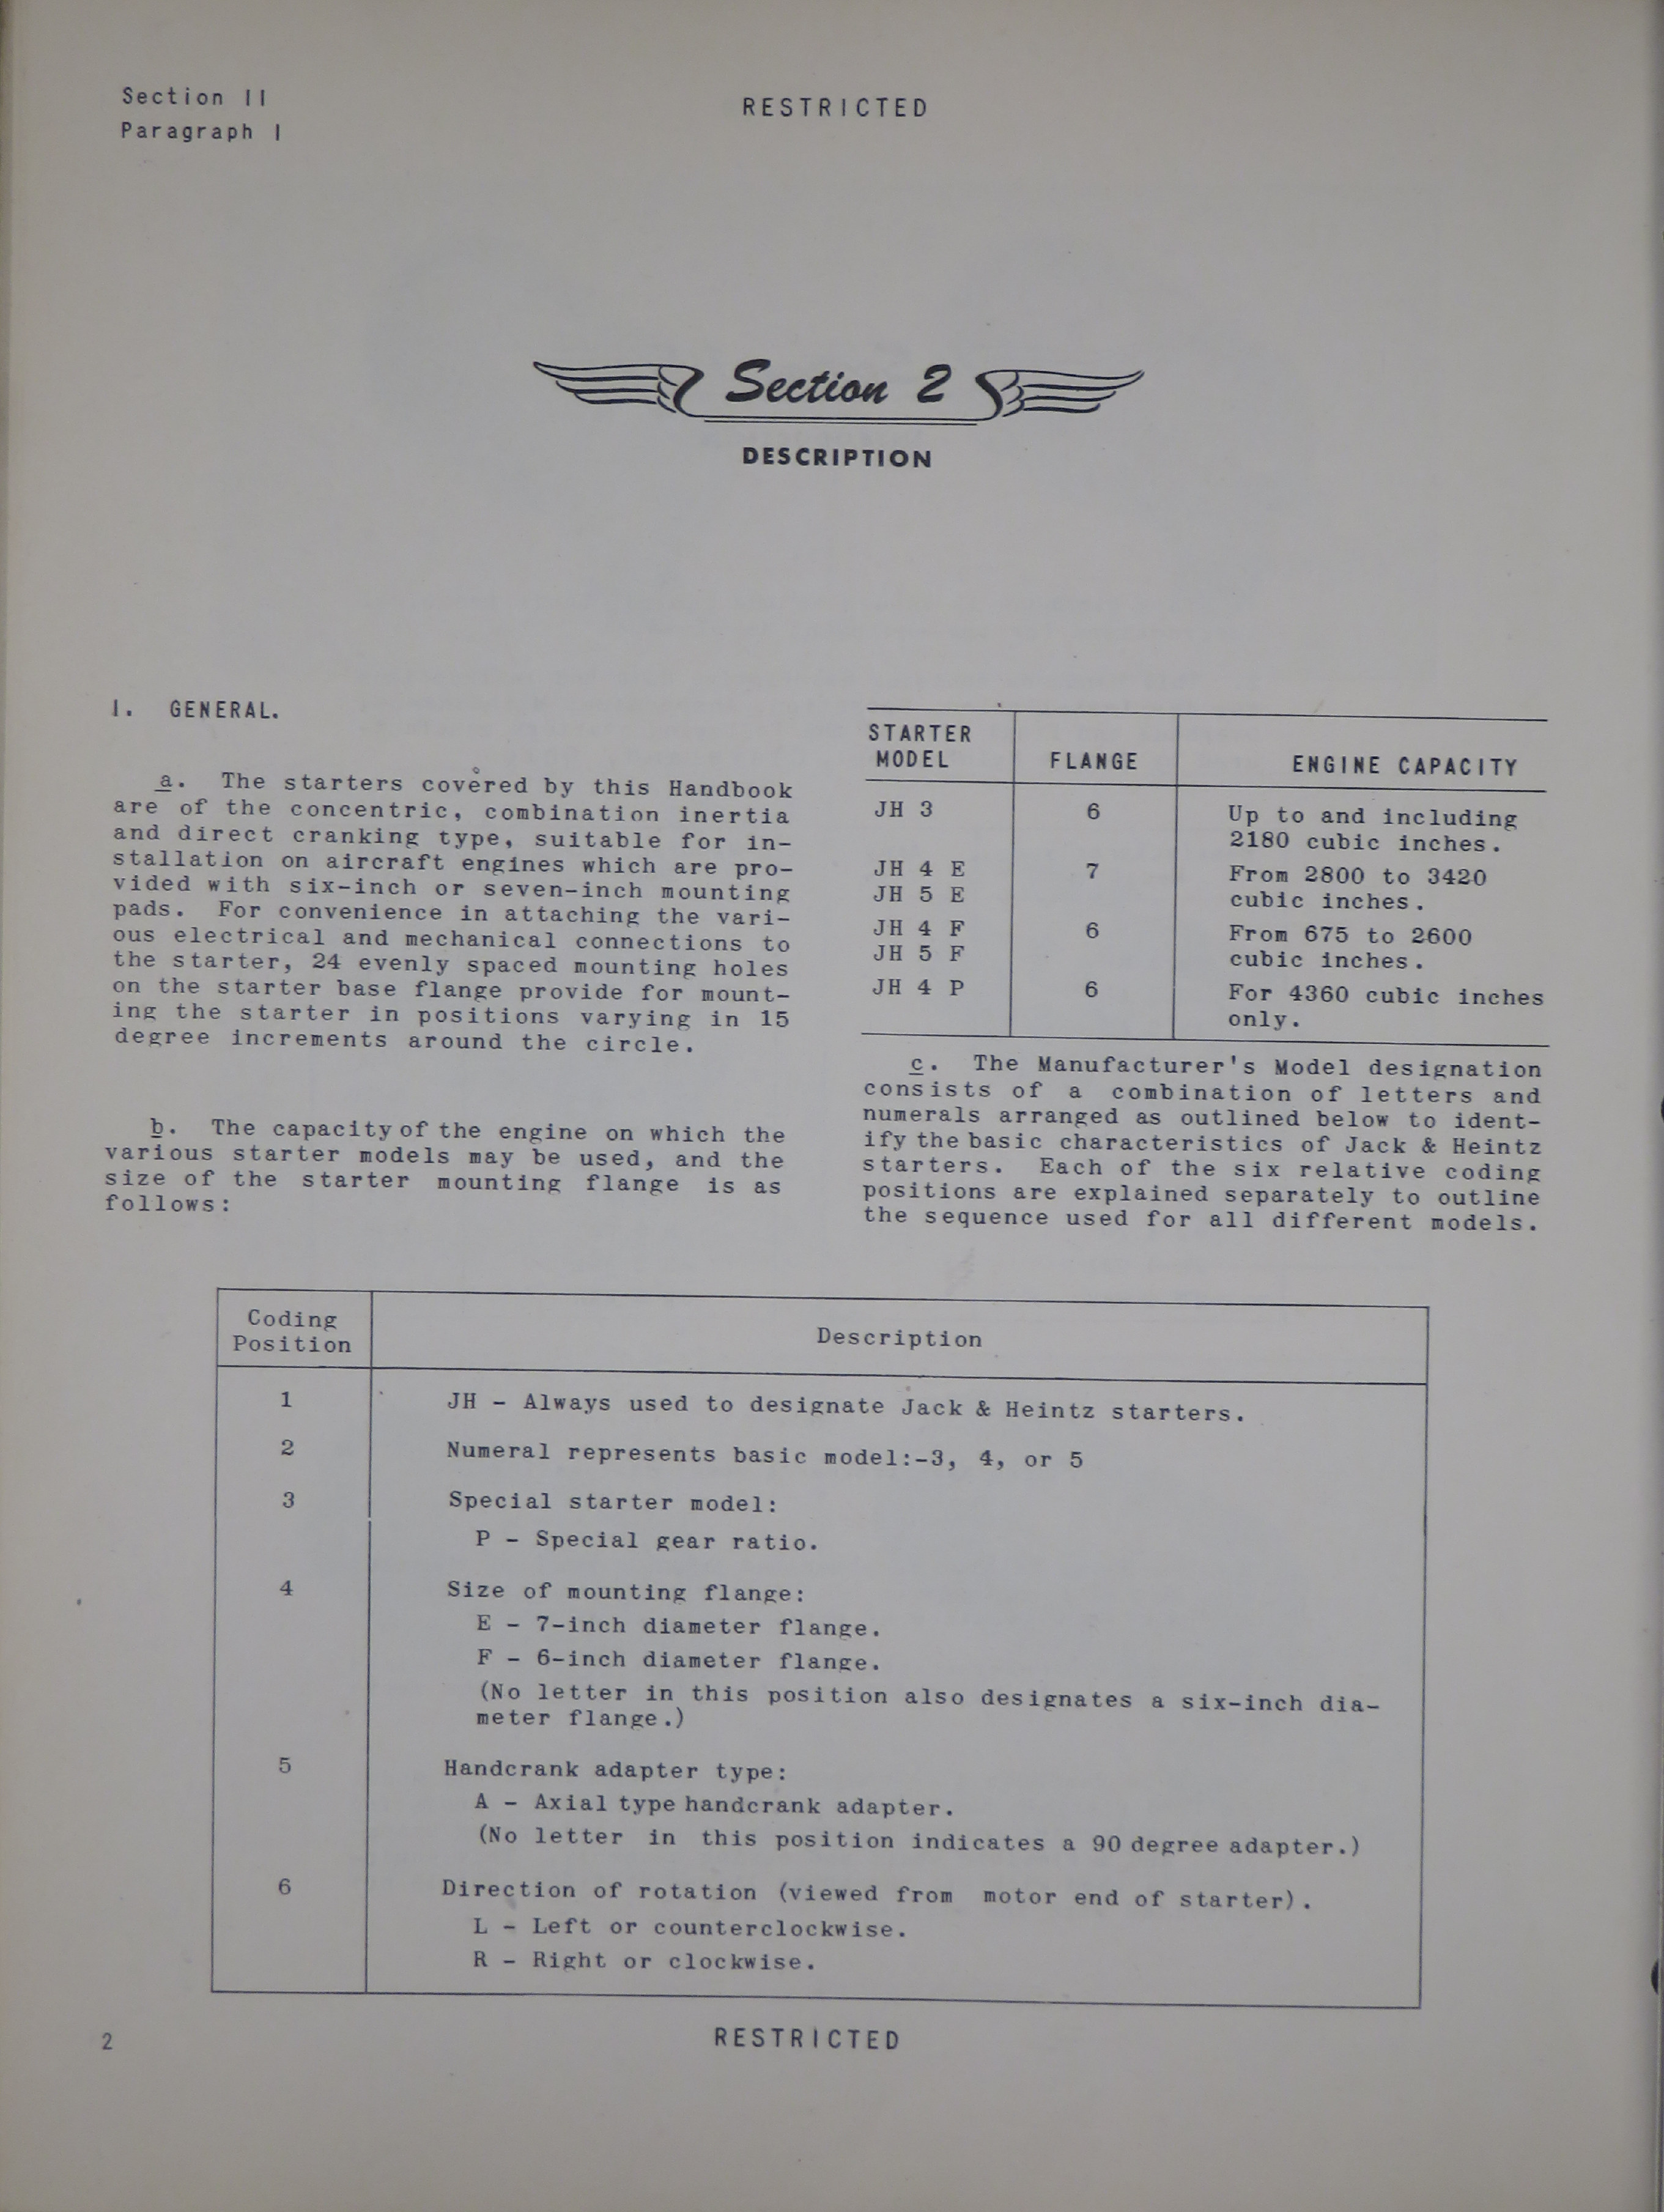 Sample page 8 from AirCorps Library document: Handbook of Instructions with Parts Catalog for Jahco Electric Starters Models JH3, JH4, and JH5 Series